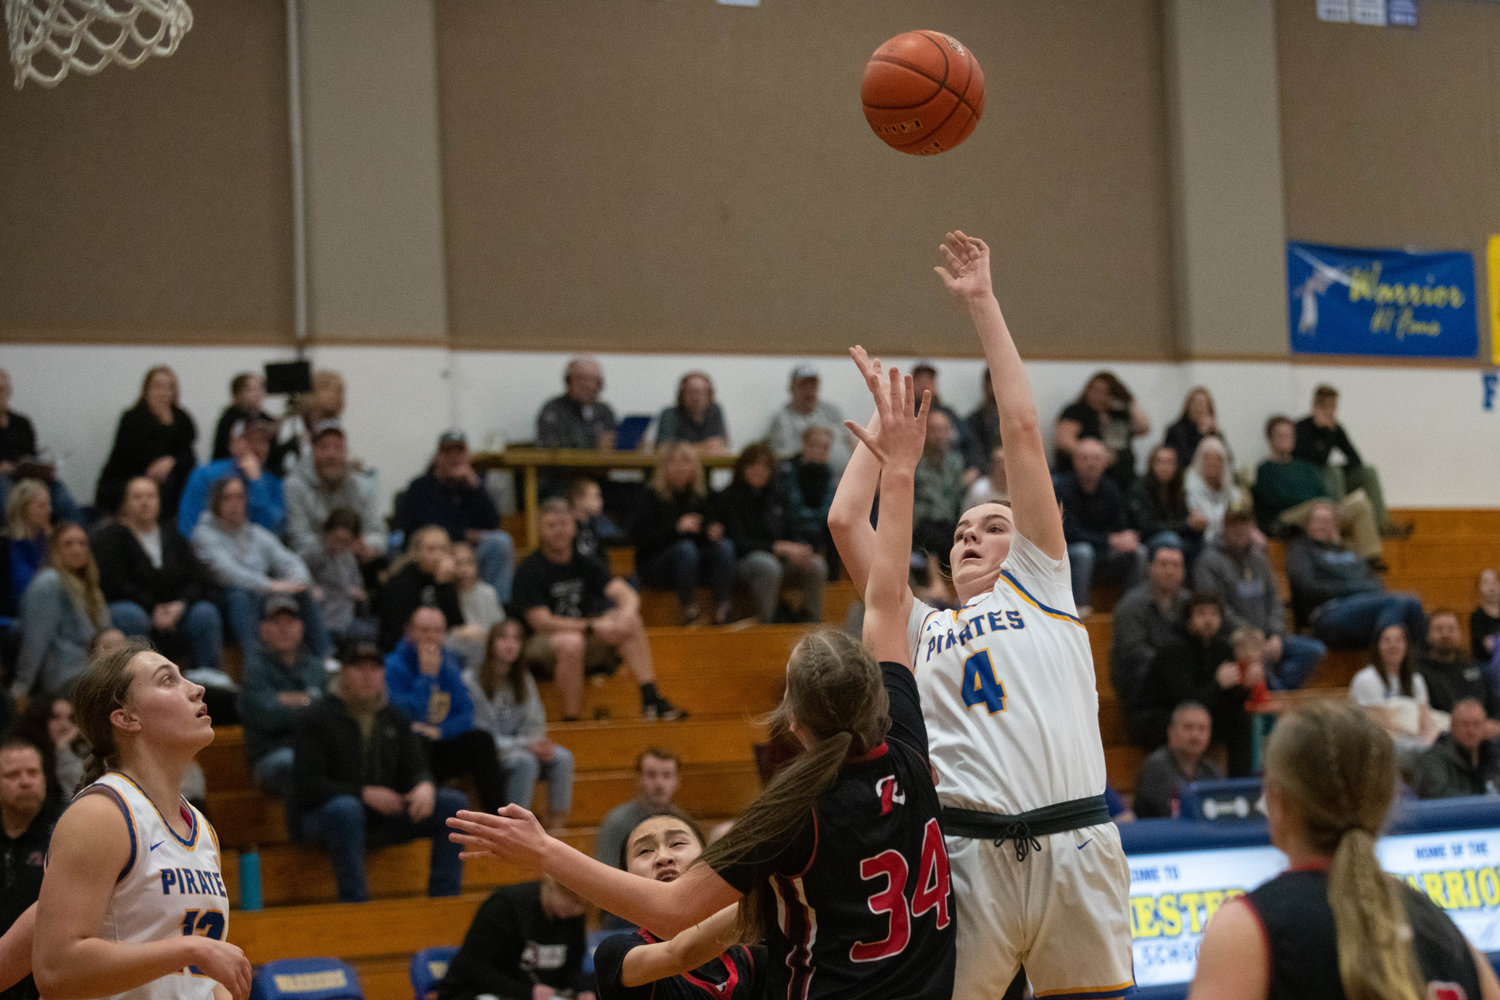 Brooklyn Loose puts up an awkward shot during the first half of Adna's district quarterfinal game against Raymond at Rochester on Feb. 7.